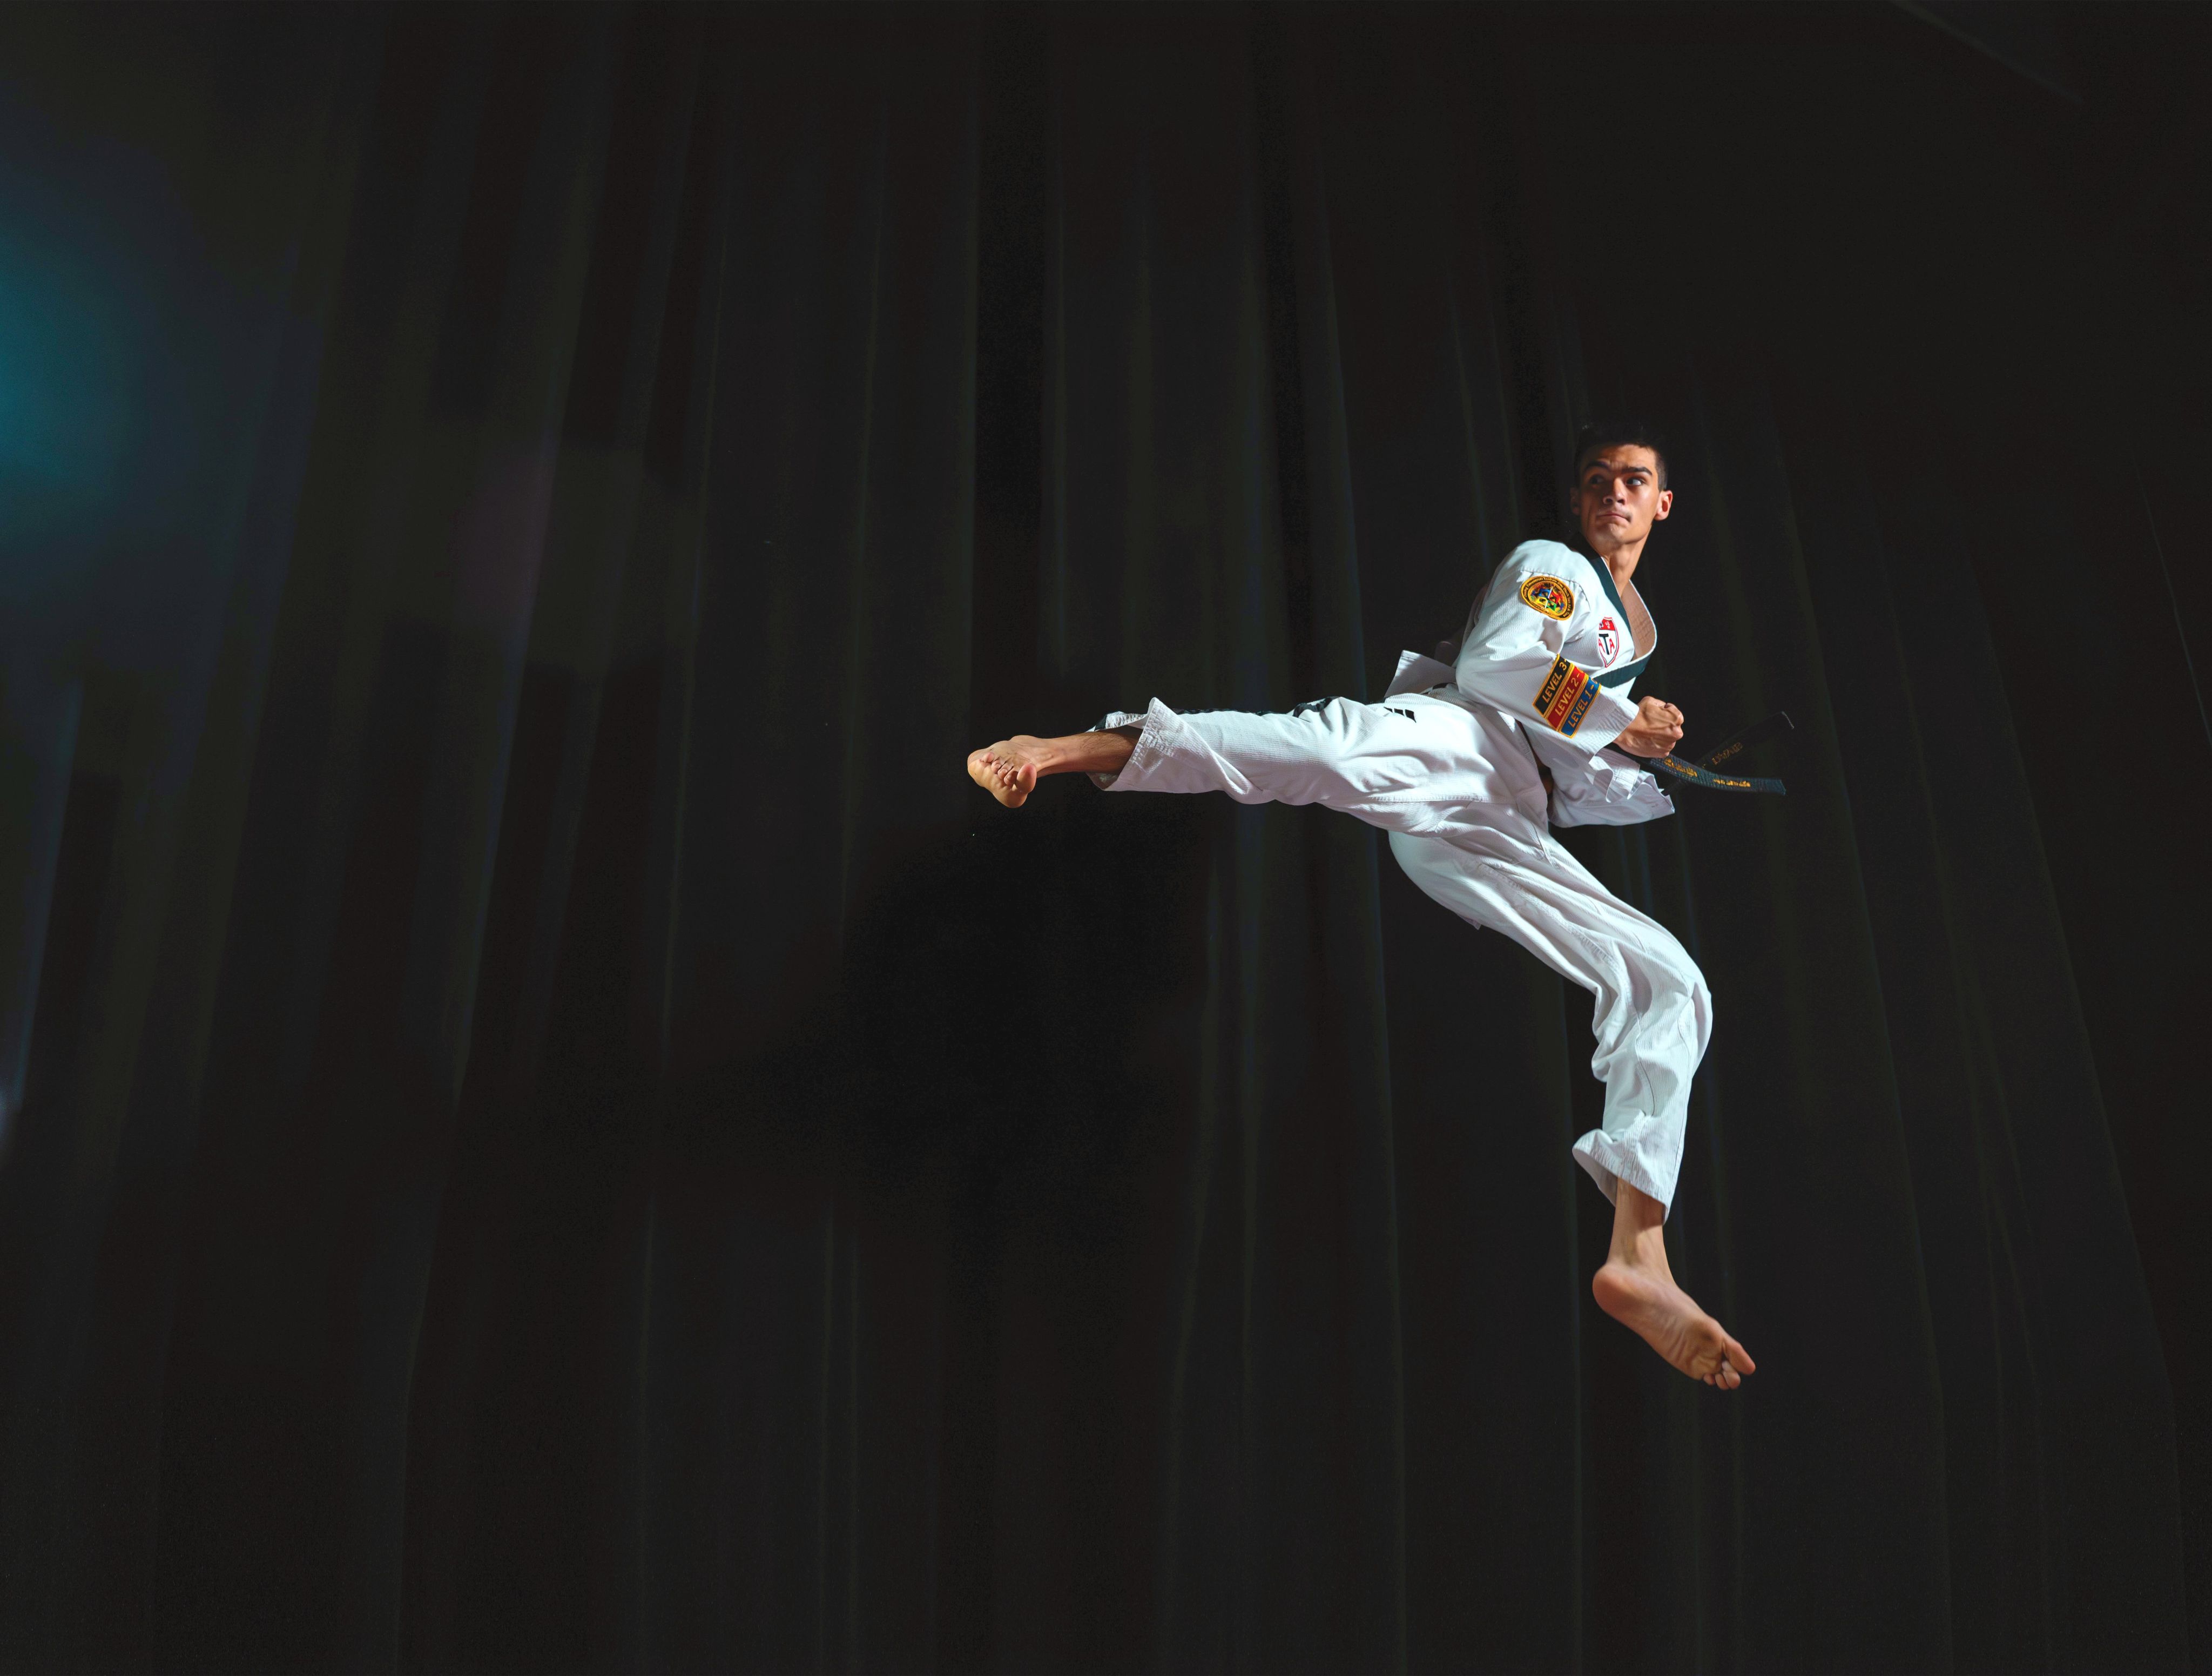 Hunter Davis is a student in the Songahm Taekwondo Instructor program at Lee College.